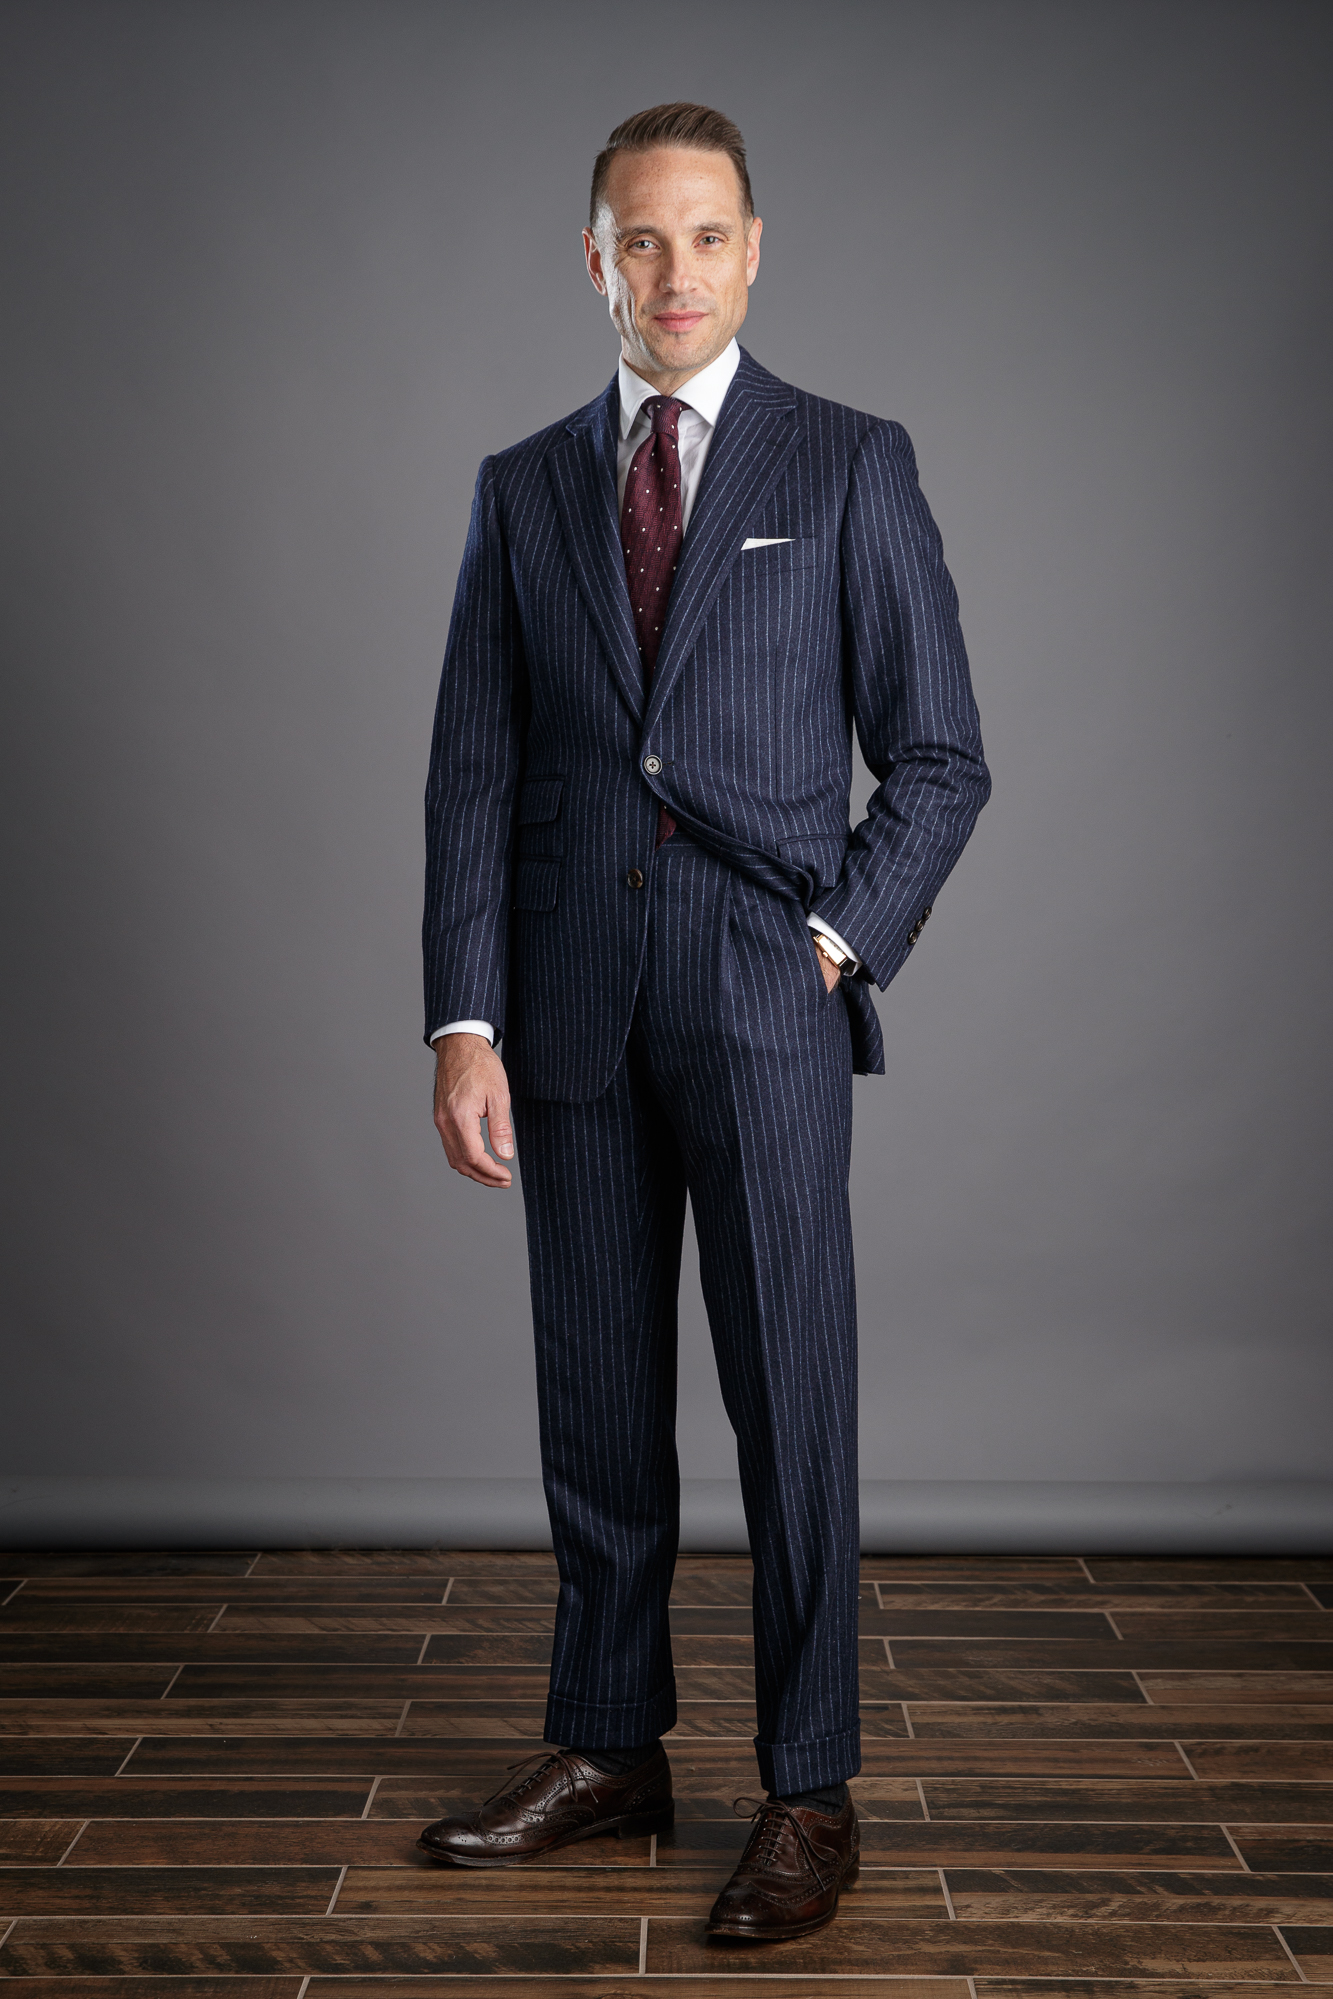 Suits With Stripes | brebdude.com